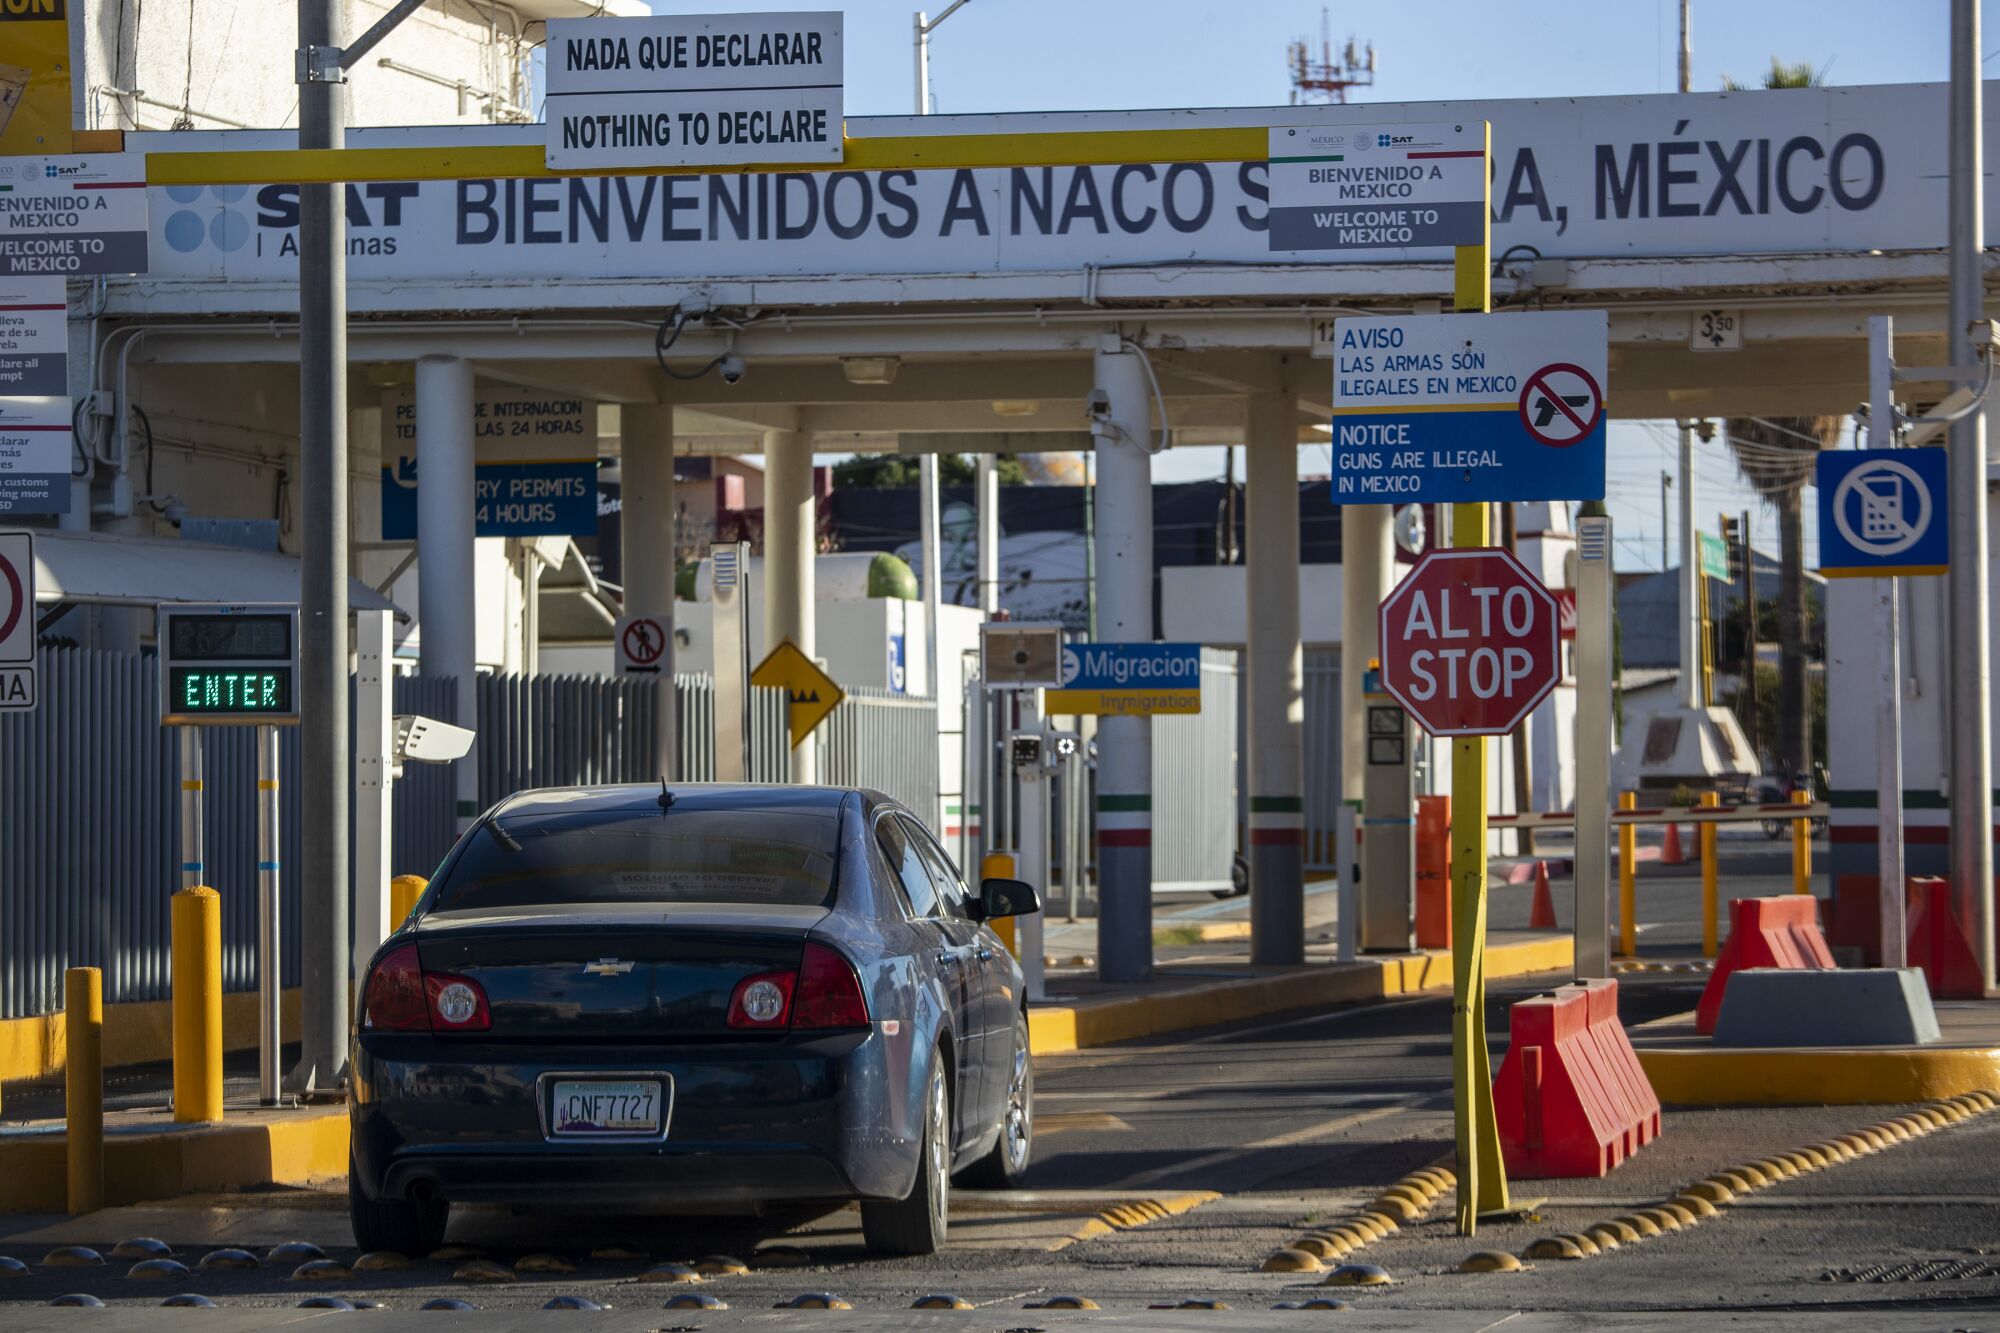 A vehicle drives into the border checkpoint in Naco Sonora in view from Naco, AZ. 